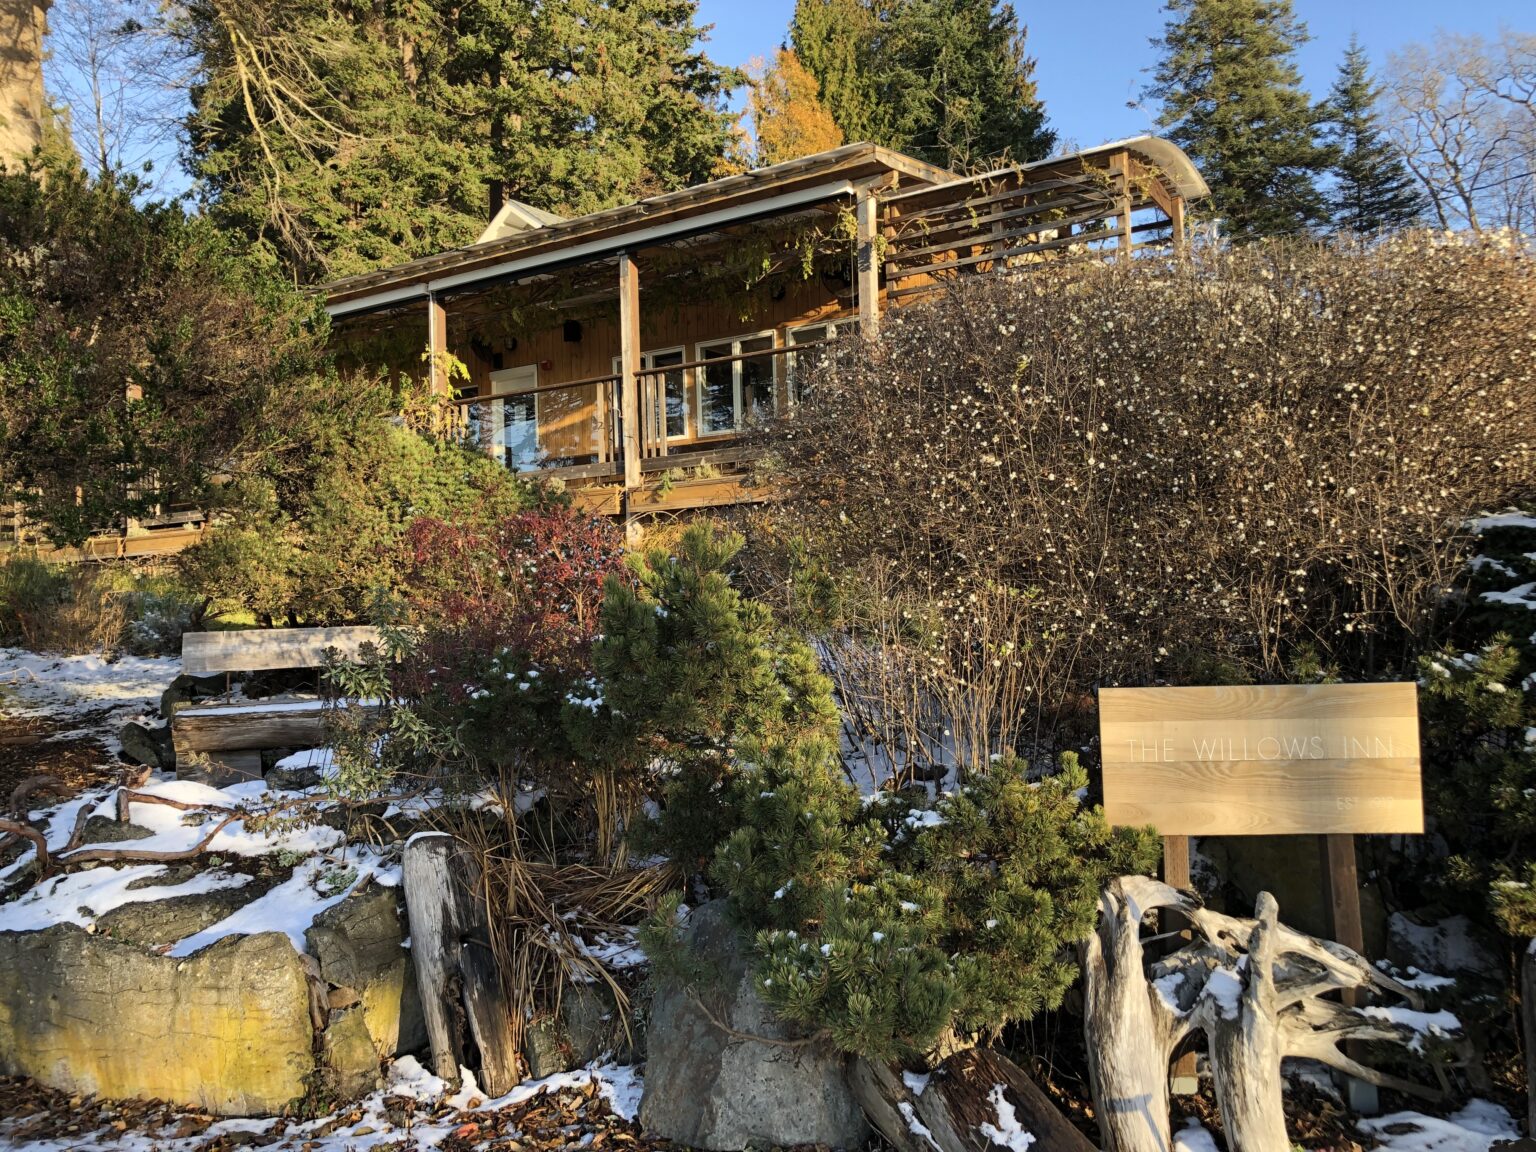 The Willows Inn on Lummi Island served its last meal before Thanksgiving 2022. In late November